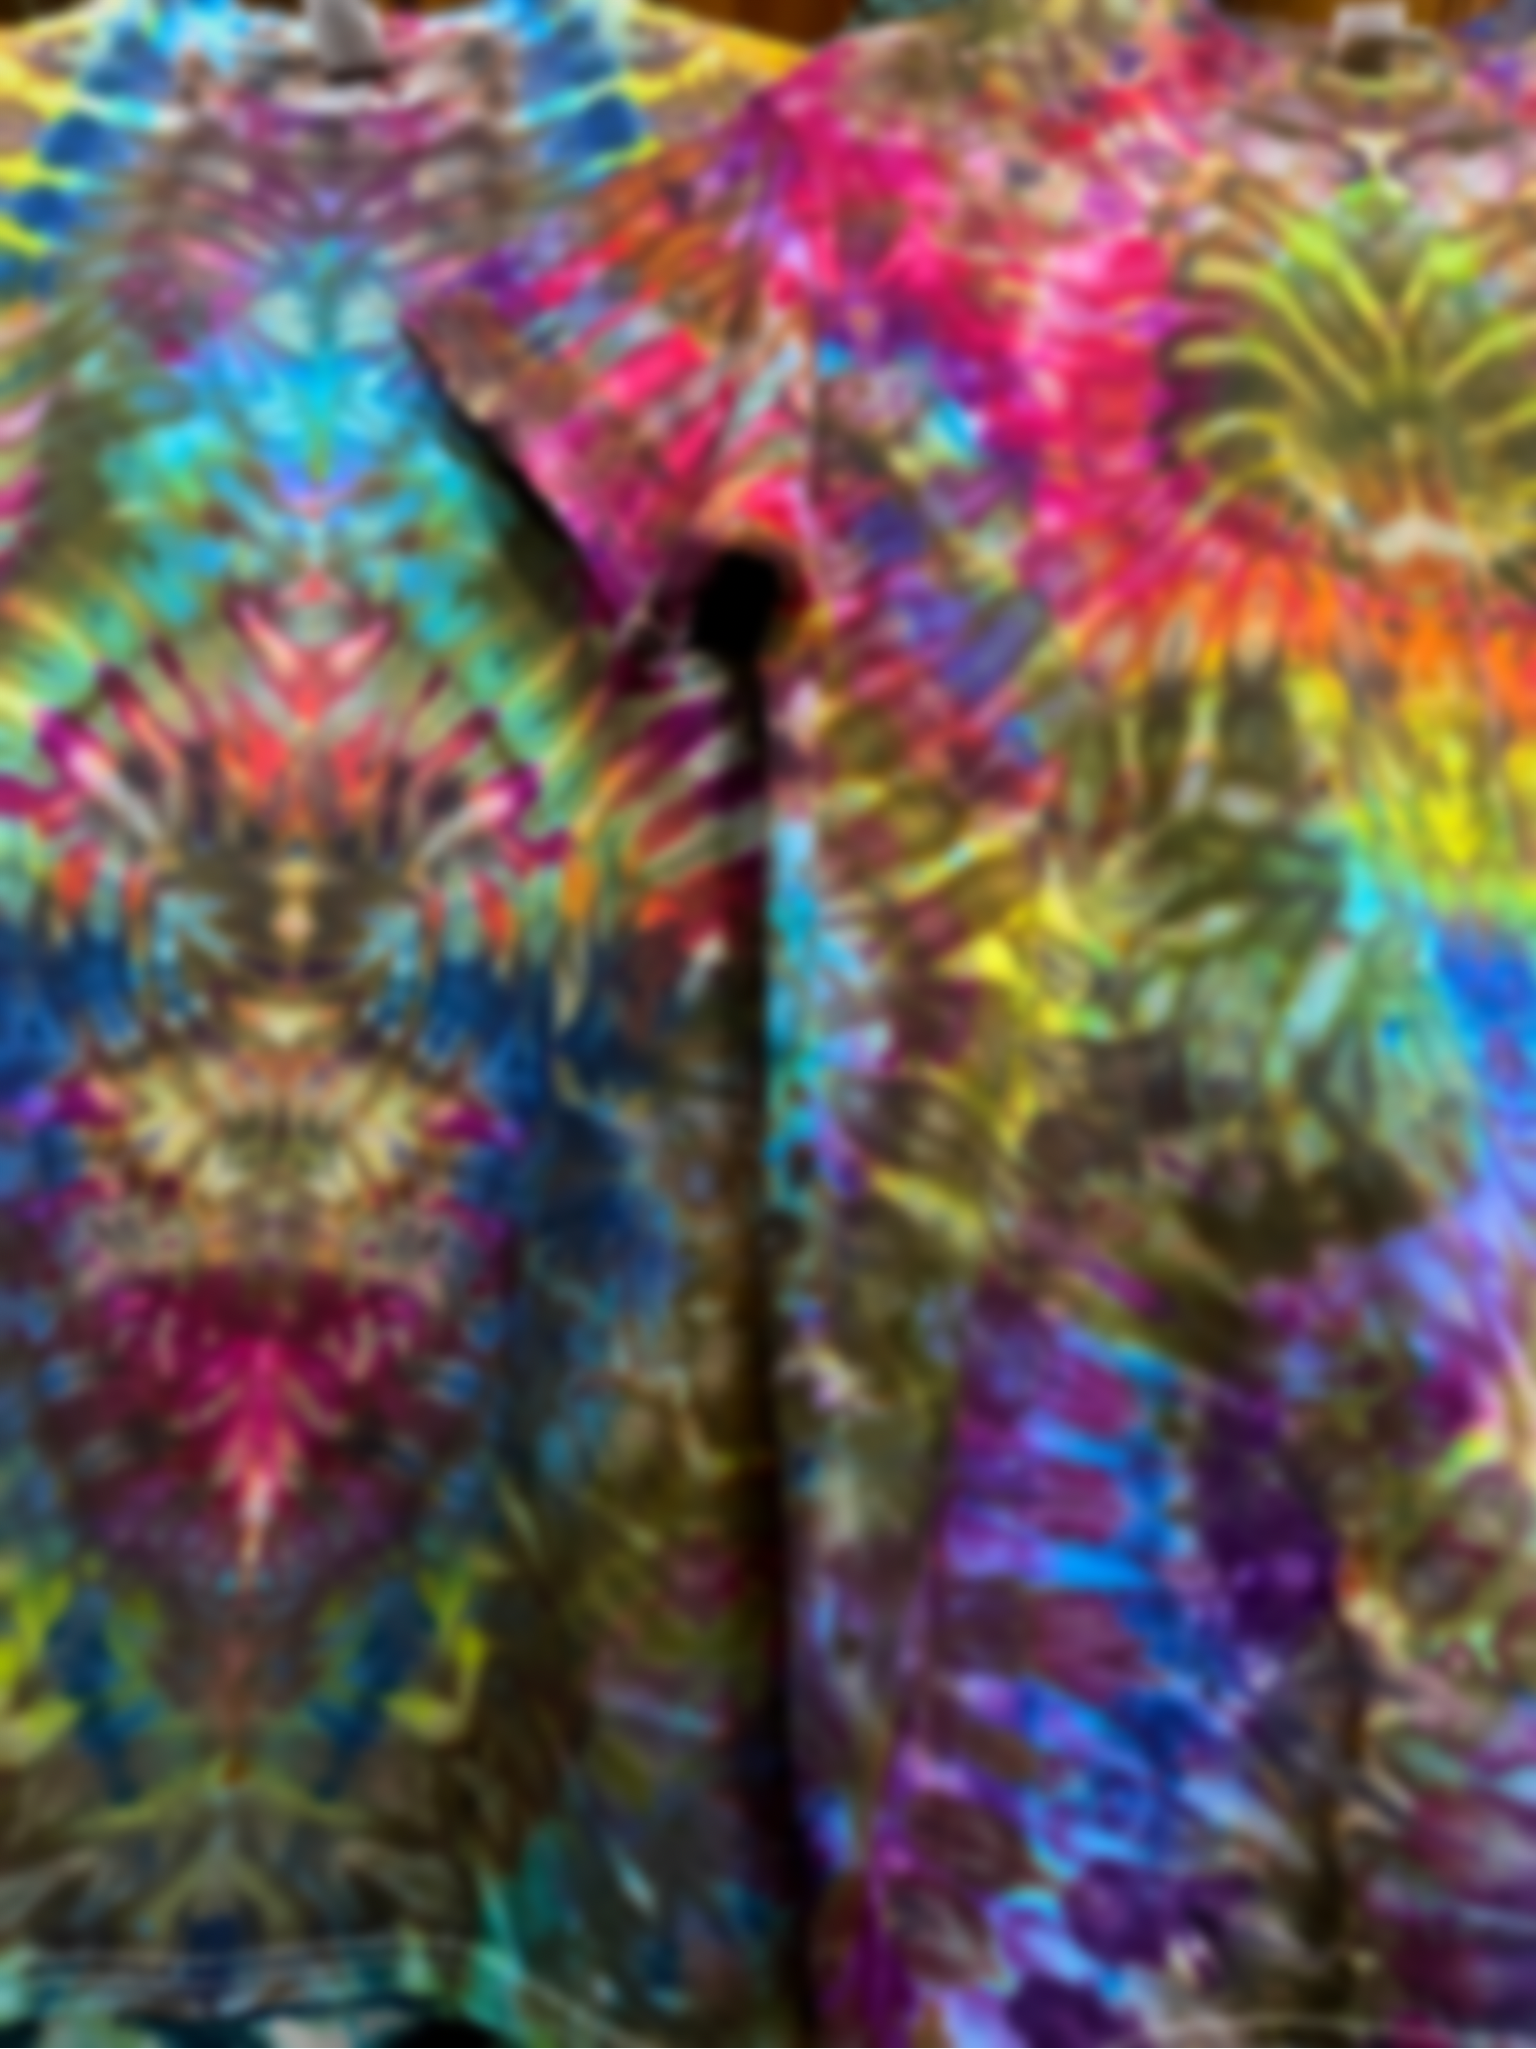 A slightly out of focus, close up shot of two rainbow psychedelic mindscape symmetrical ice dyed t-shirts hanging next to one another